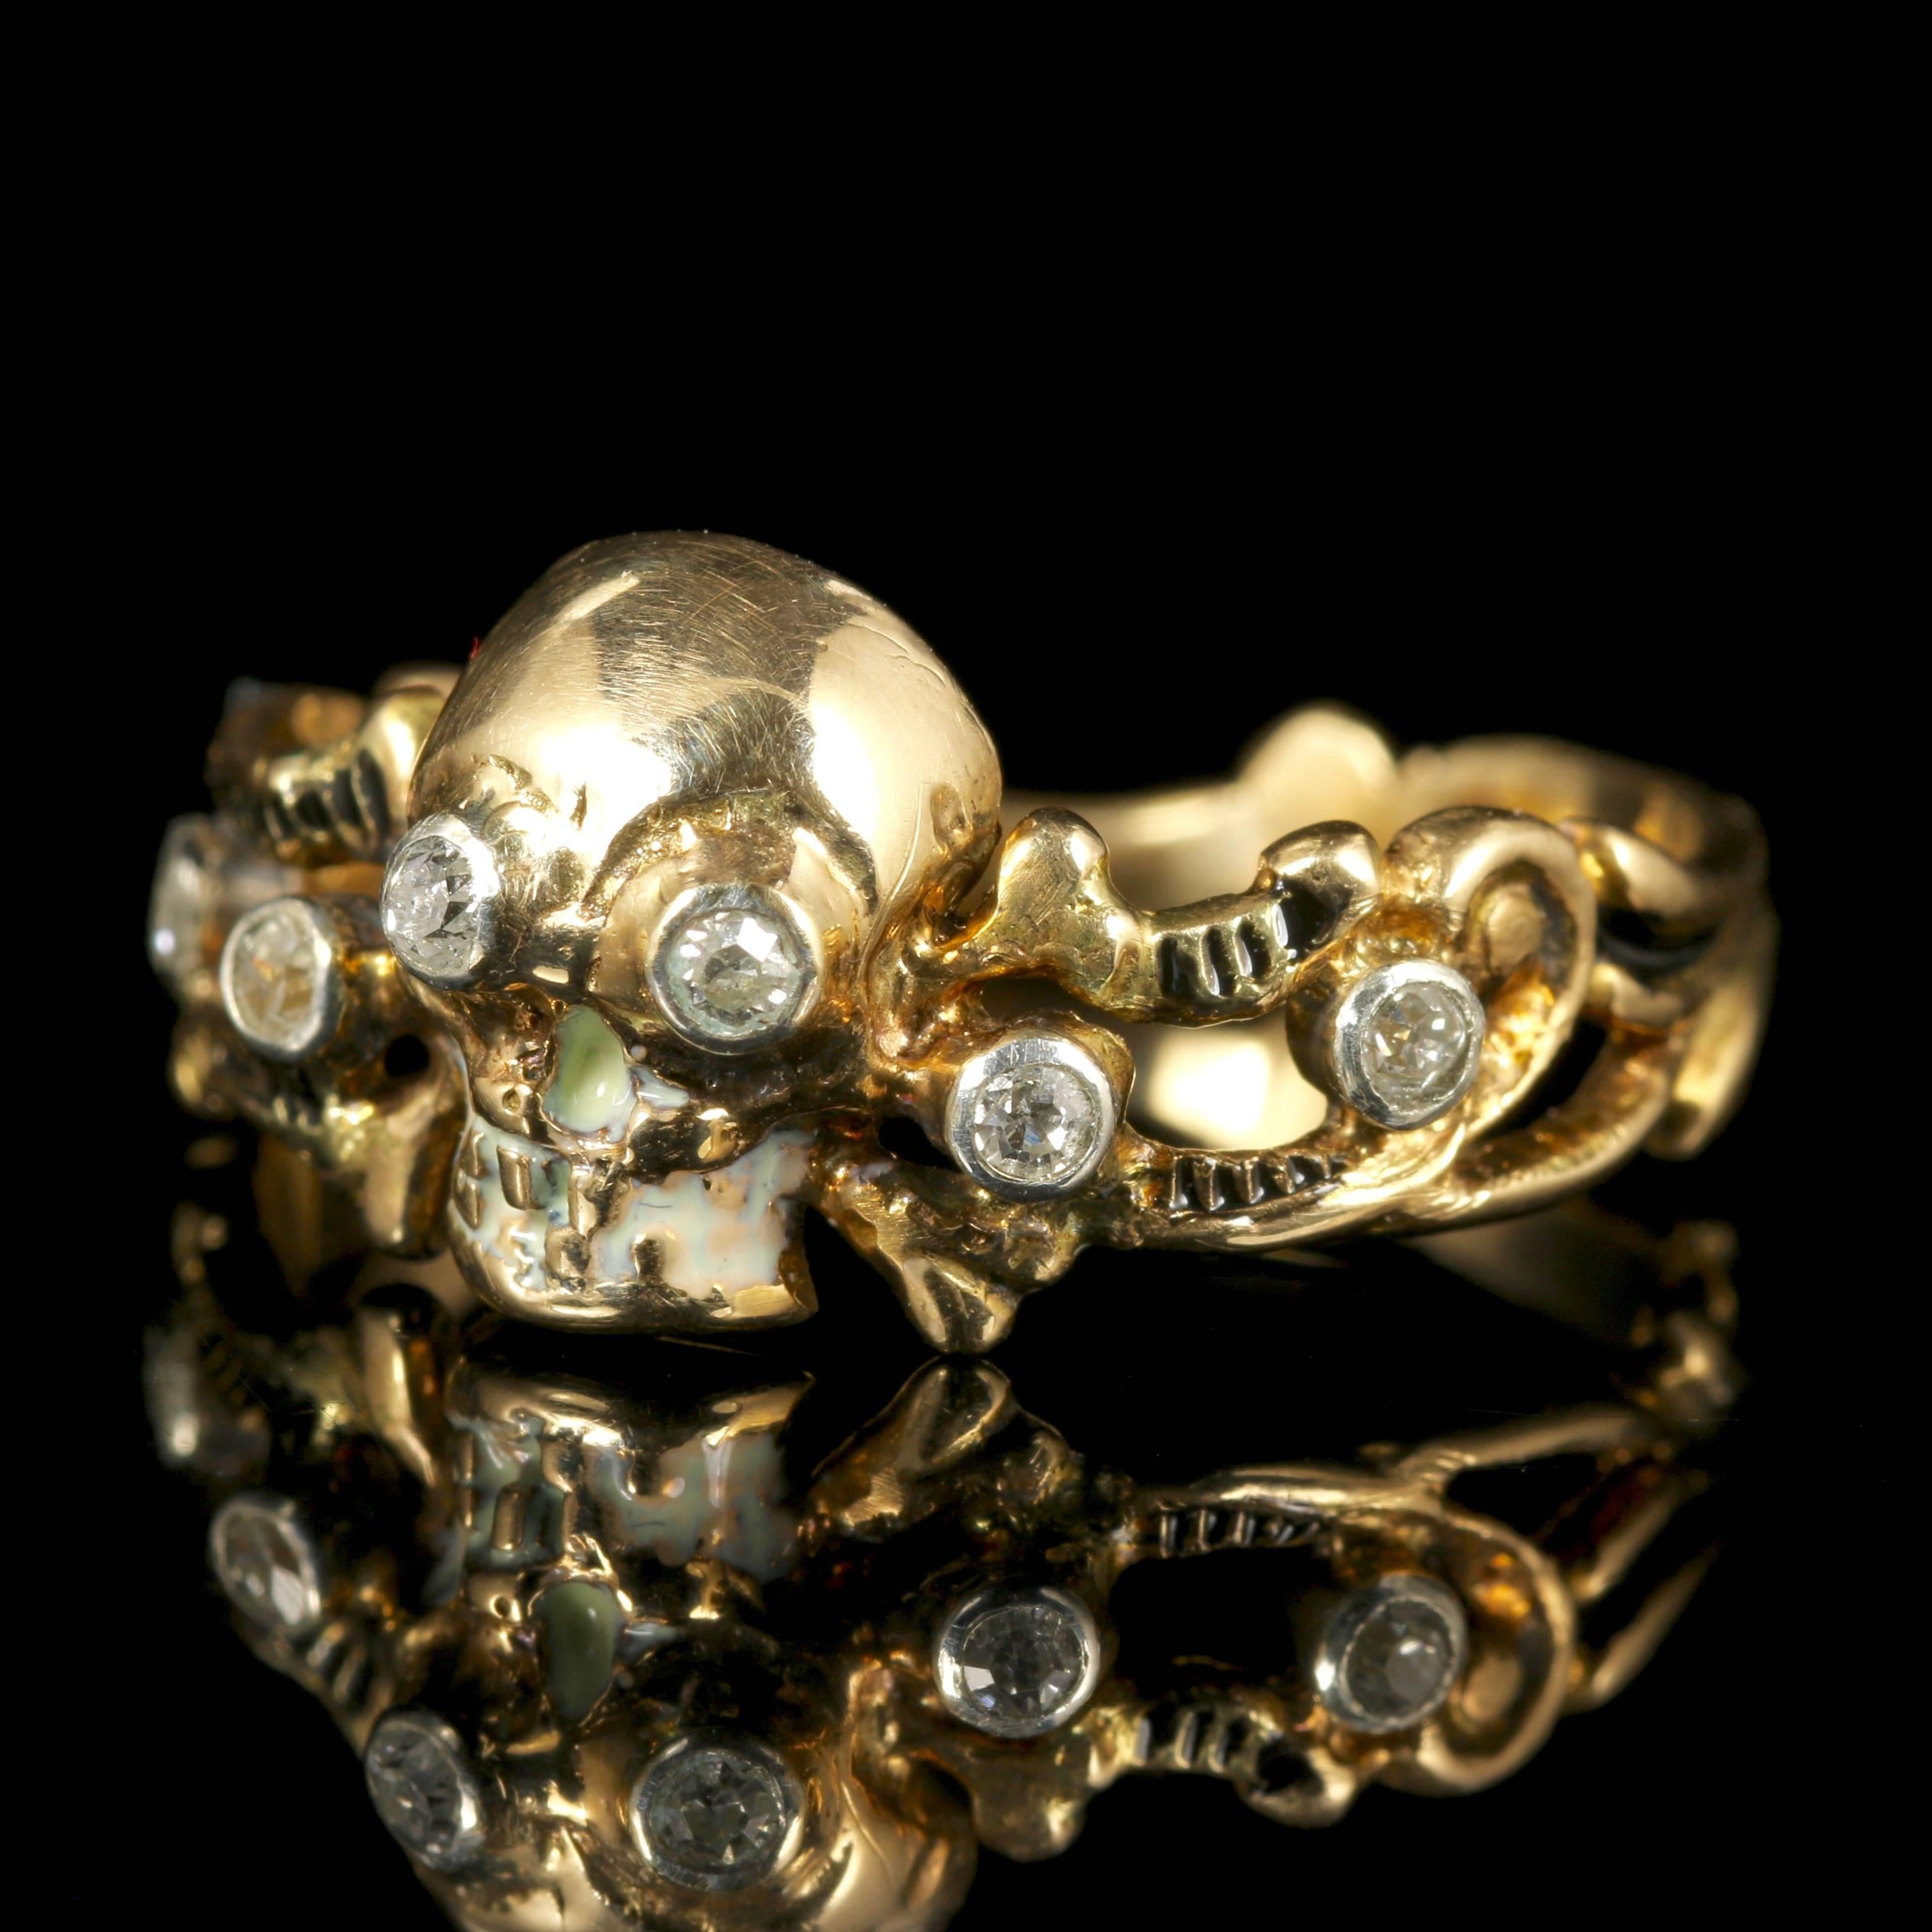 This fabulous 18ct Yellow Gold Memento Mori Diamond Skull and cross bone ring is fabulous.

The skull and crossbones are set along the central gallery of the ring with an Enamel chin.

Skull jewellery (Memento Mori) is very collectable. 

Memento